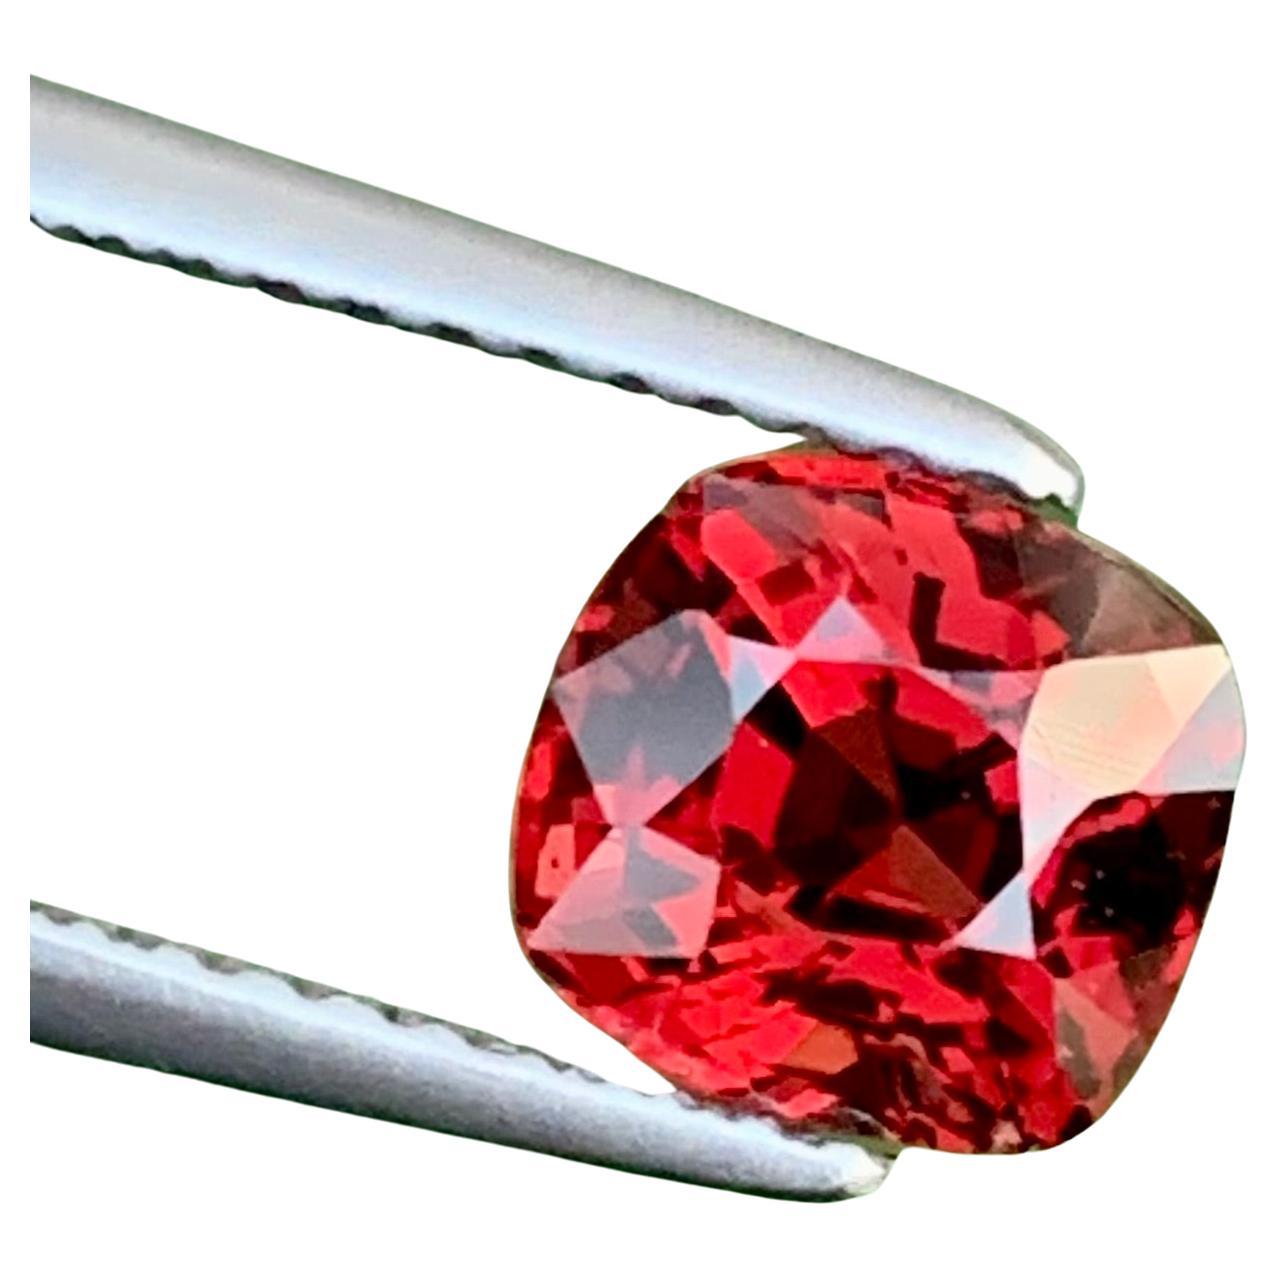 GGI Certified 1.05 Carat Faceted Red Spinel From Myanmar, Loose Burmese Spinel For Sale